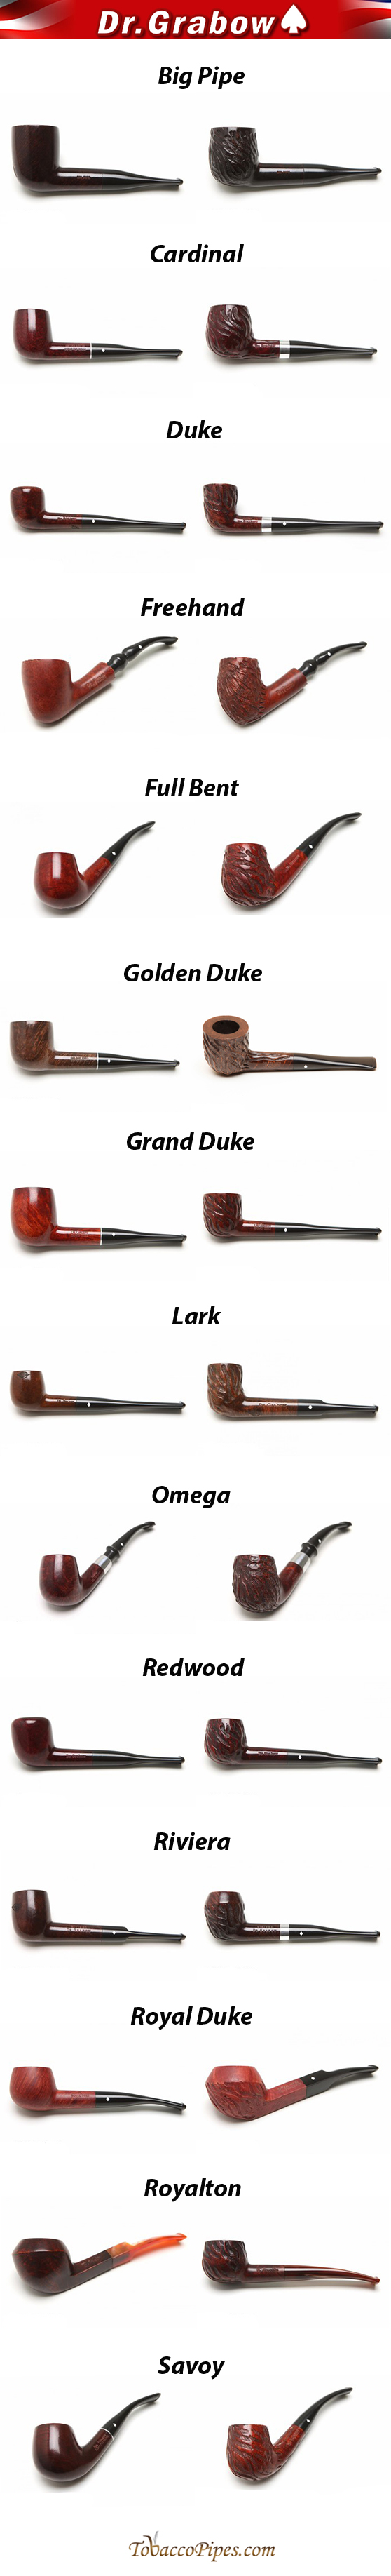 Dr. Grabow Models and Finishes - #1 US Manufactured Selling Pipes